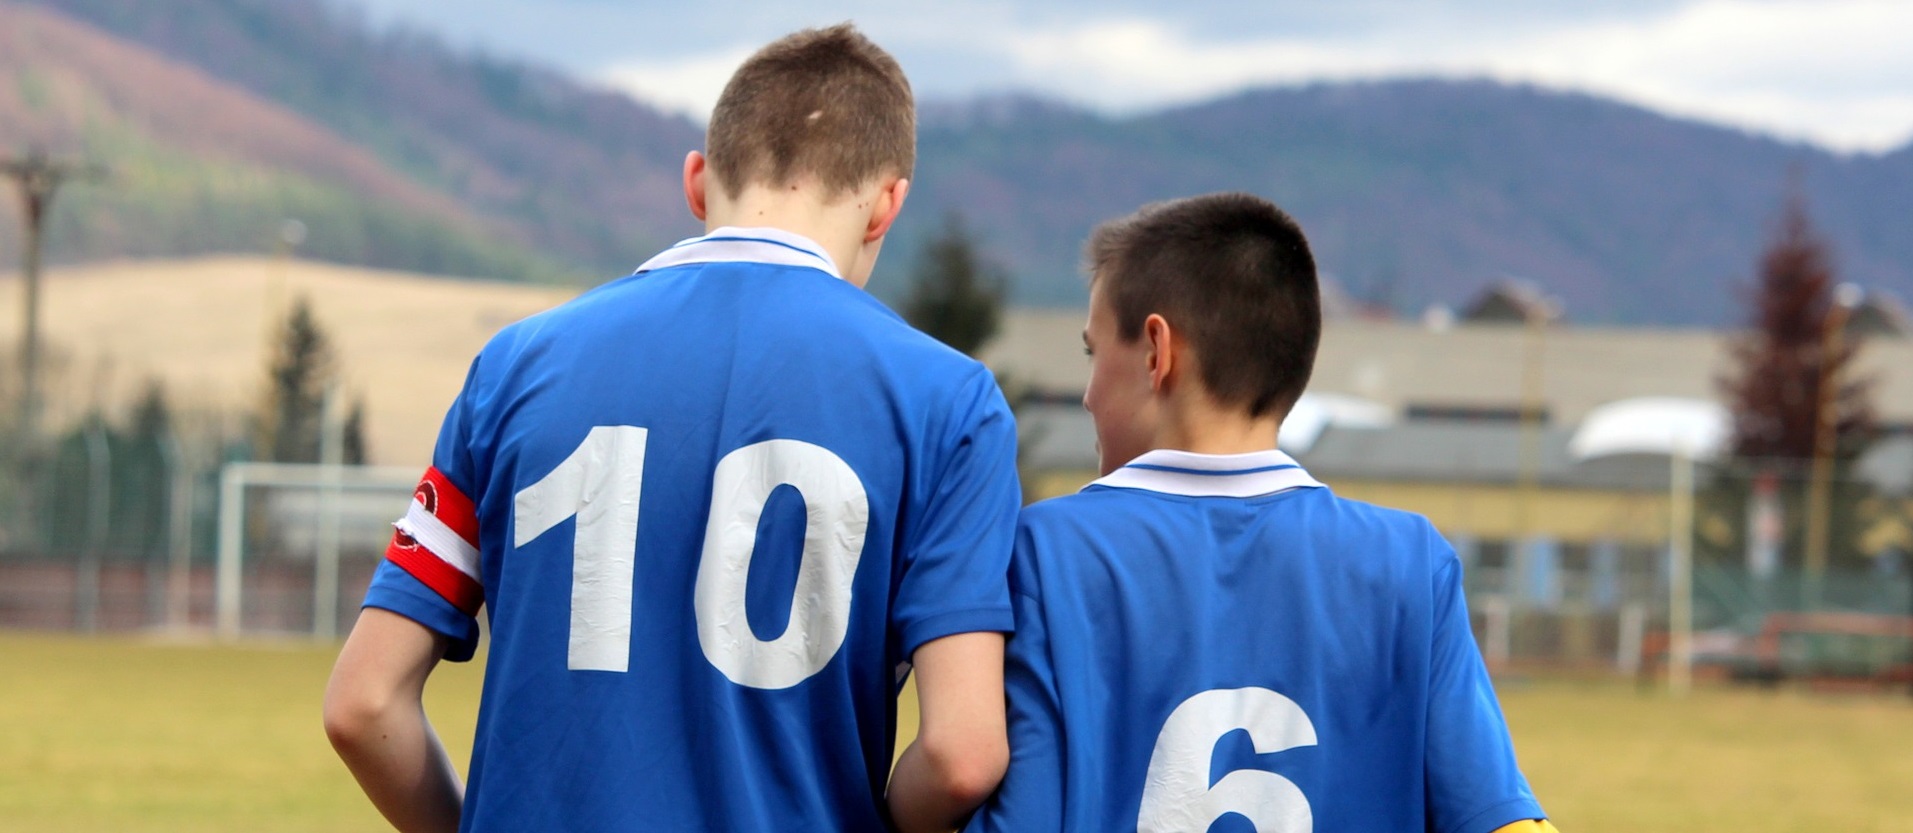 Children grow at different rates which is dangerous and the cause of many child sports injuries